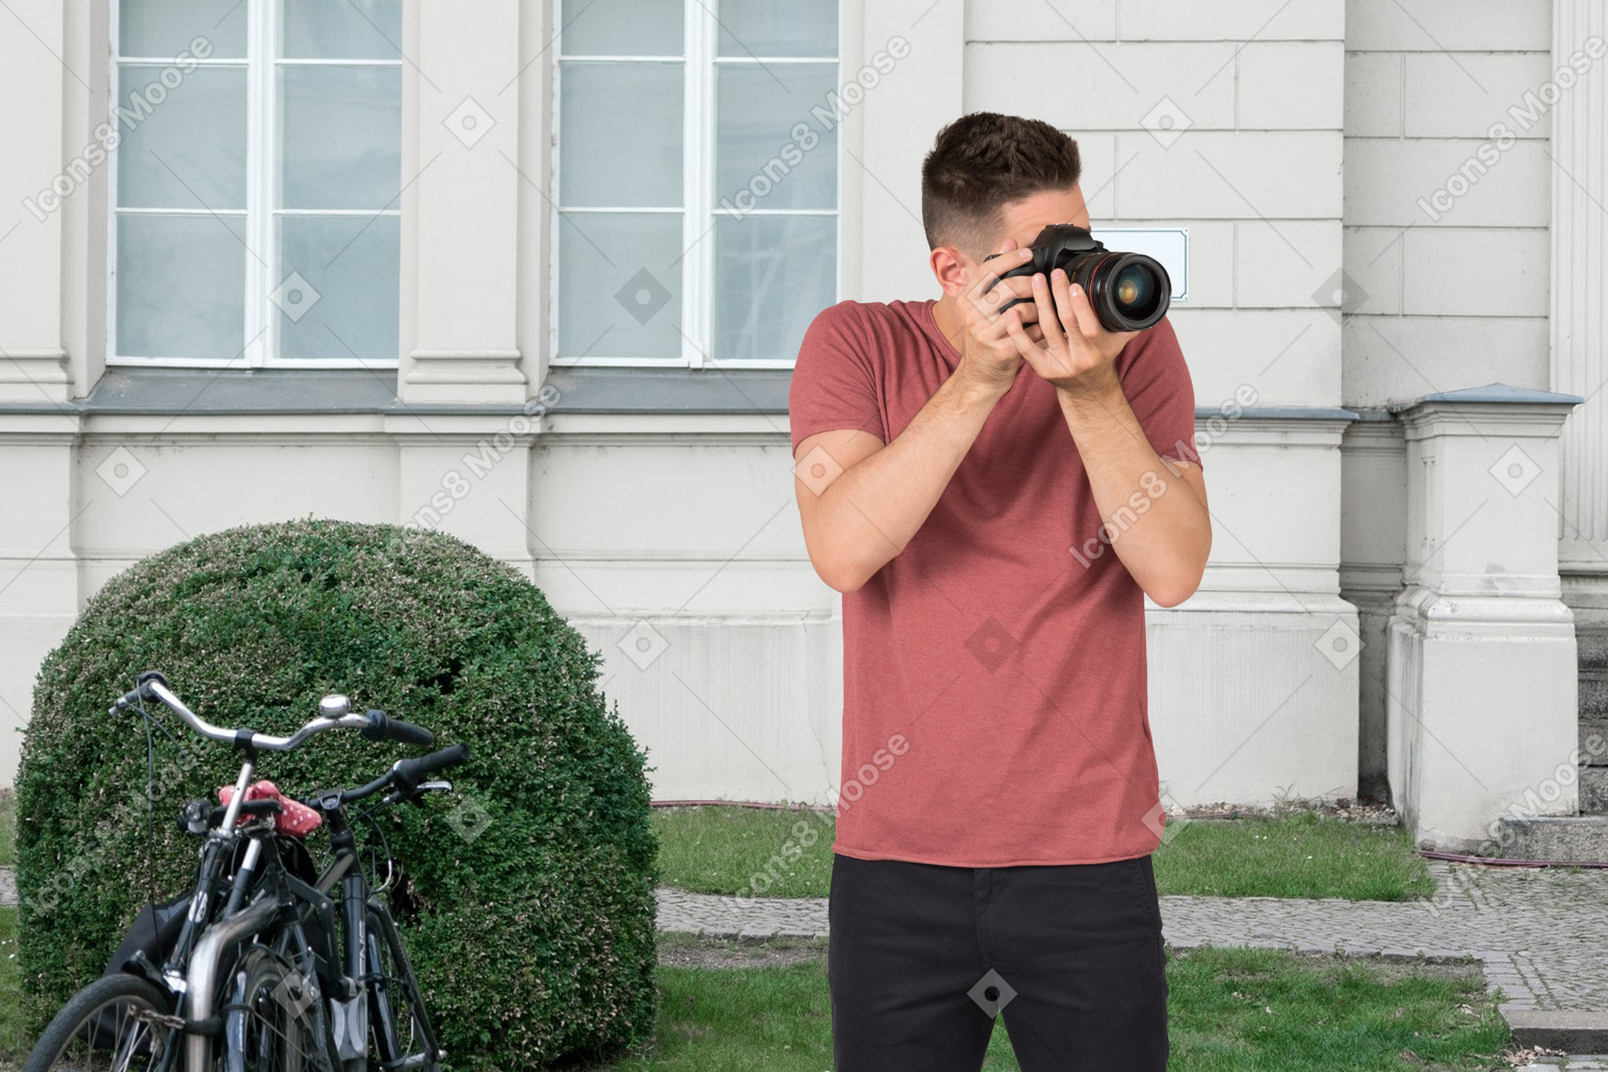 A man taking a picture with camera outside